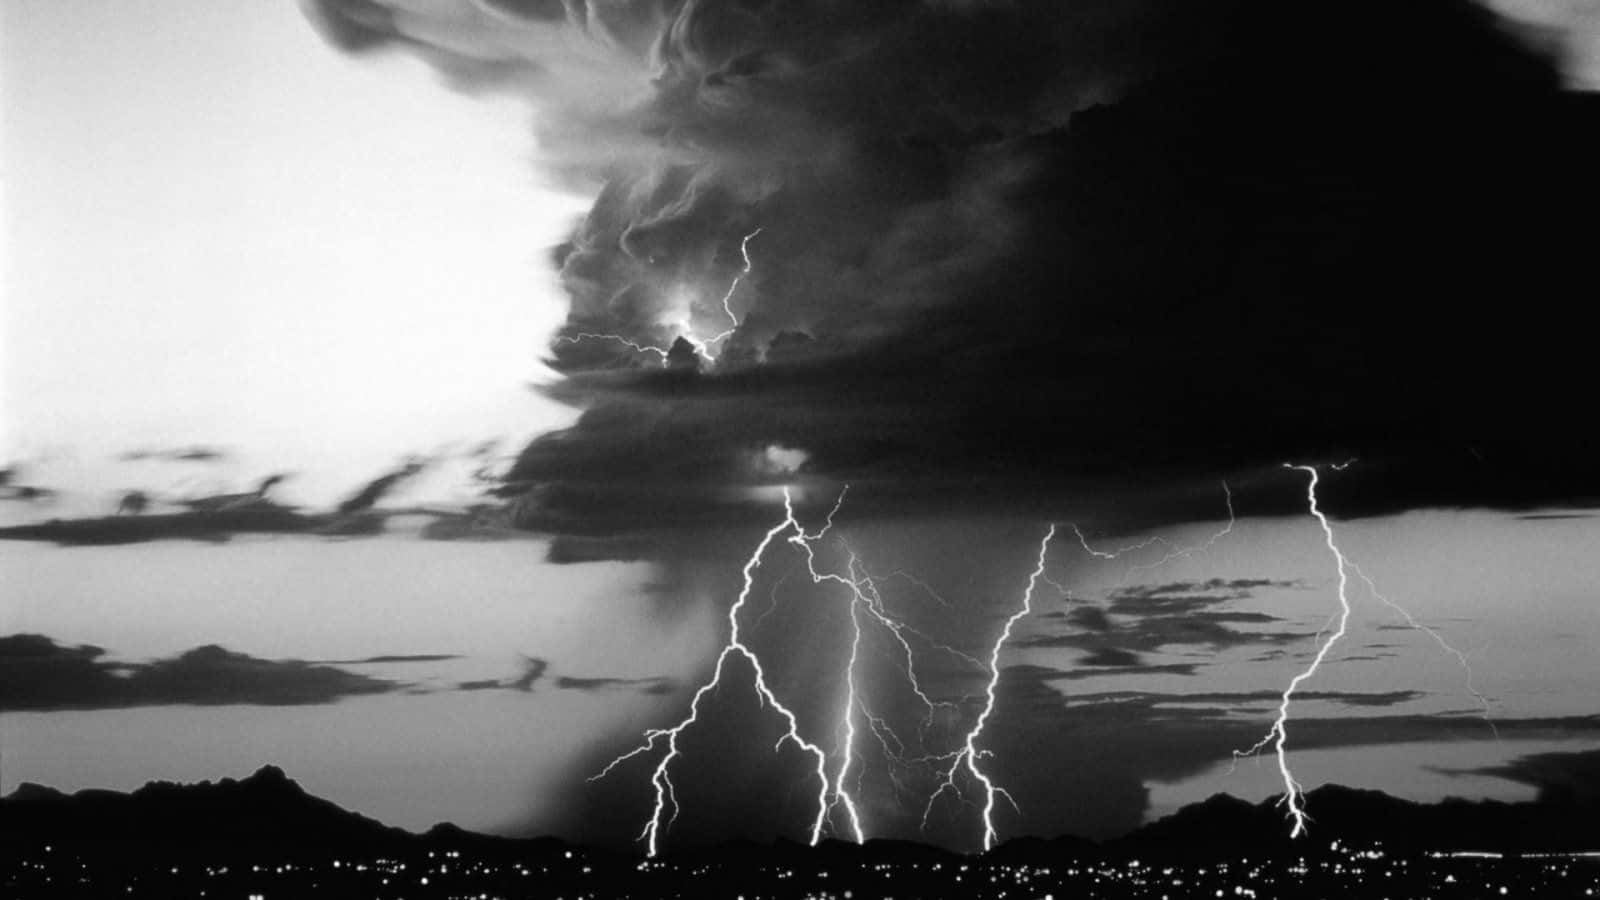 Dramatic Black and White Storm Wallpaper